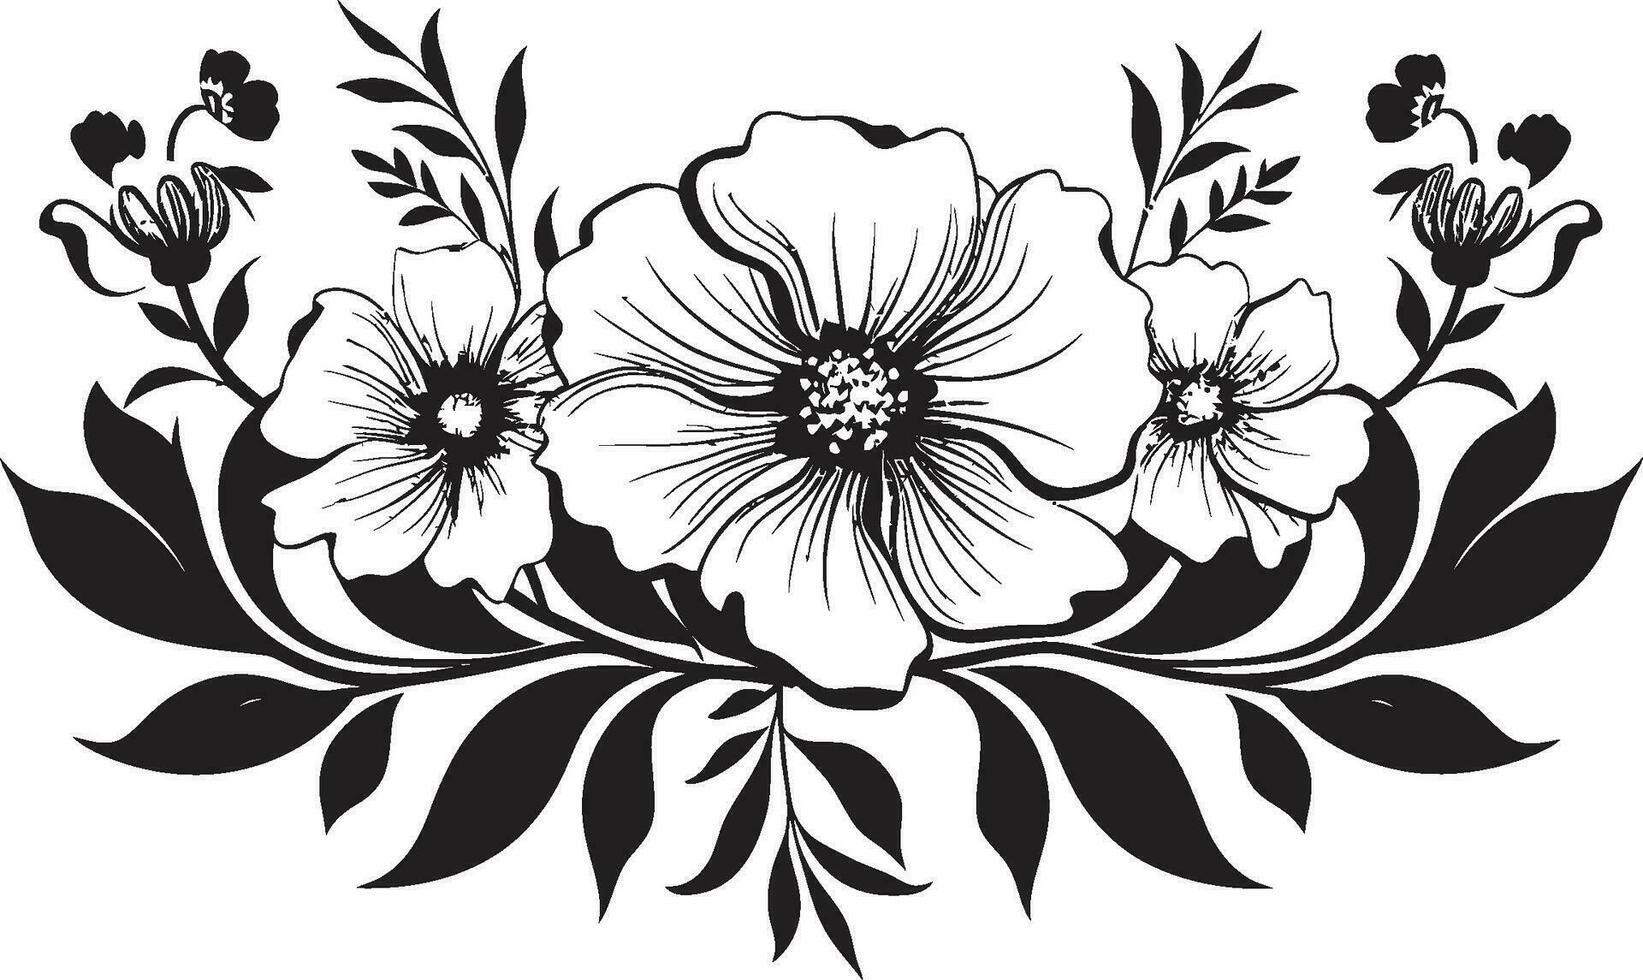 Noir Blossom Medley Black Floral Logo Elements Chic Inked Garden Whimsy Hand Drawn Florals vector